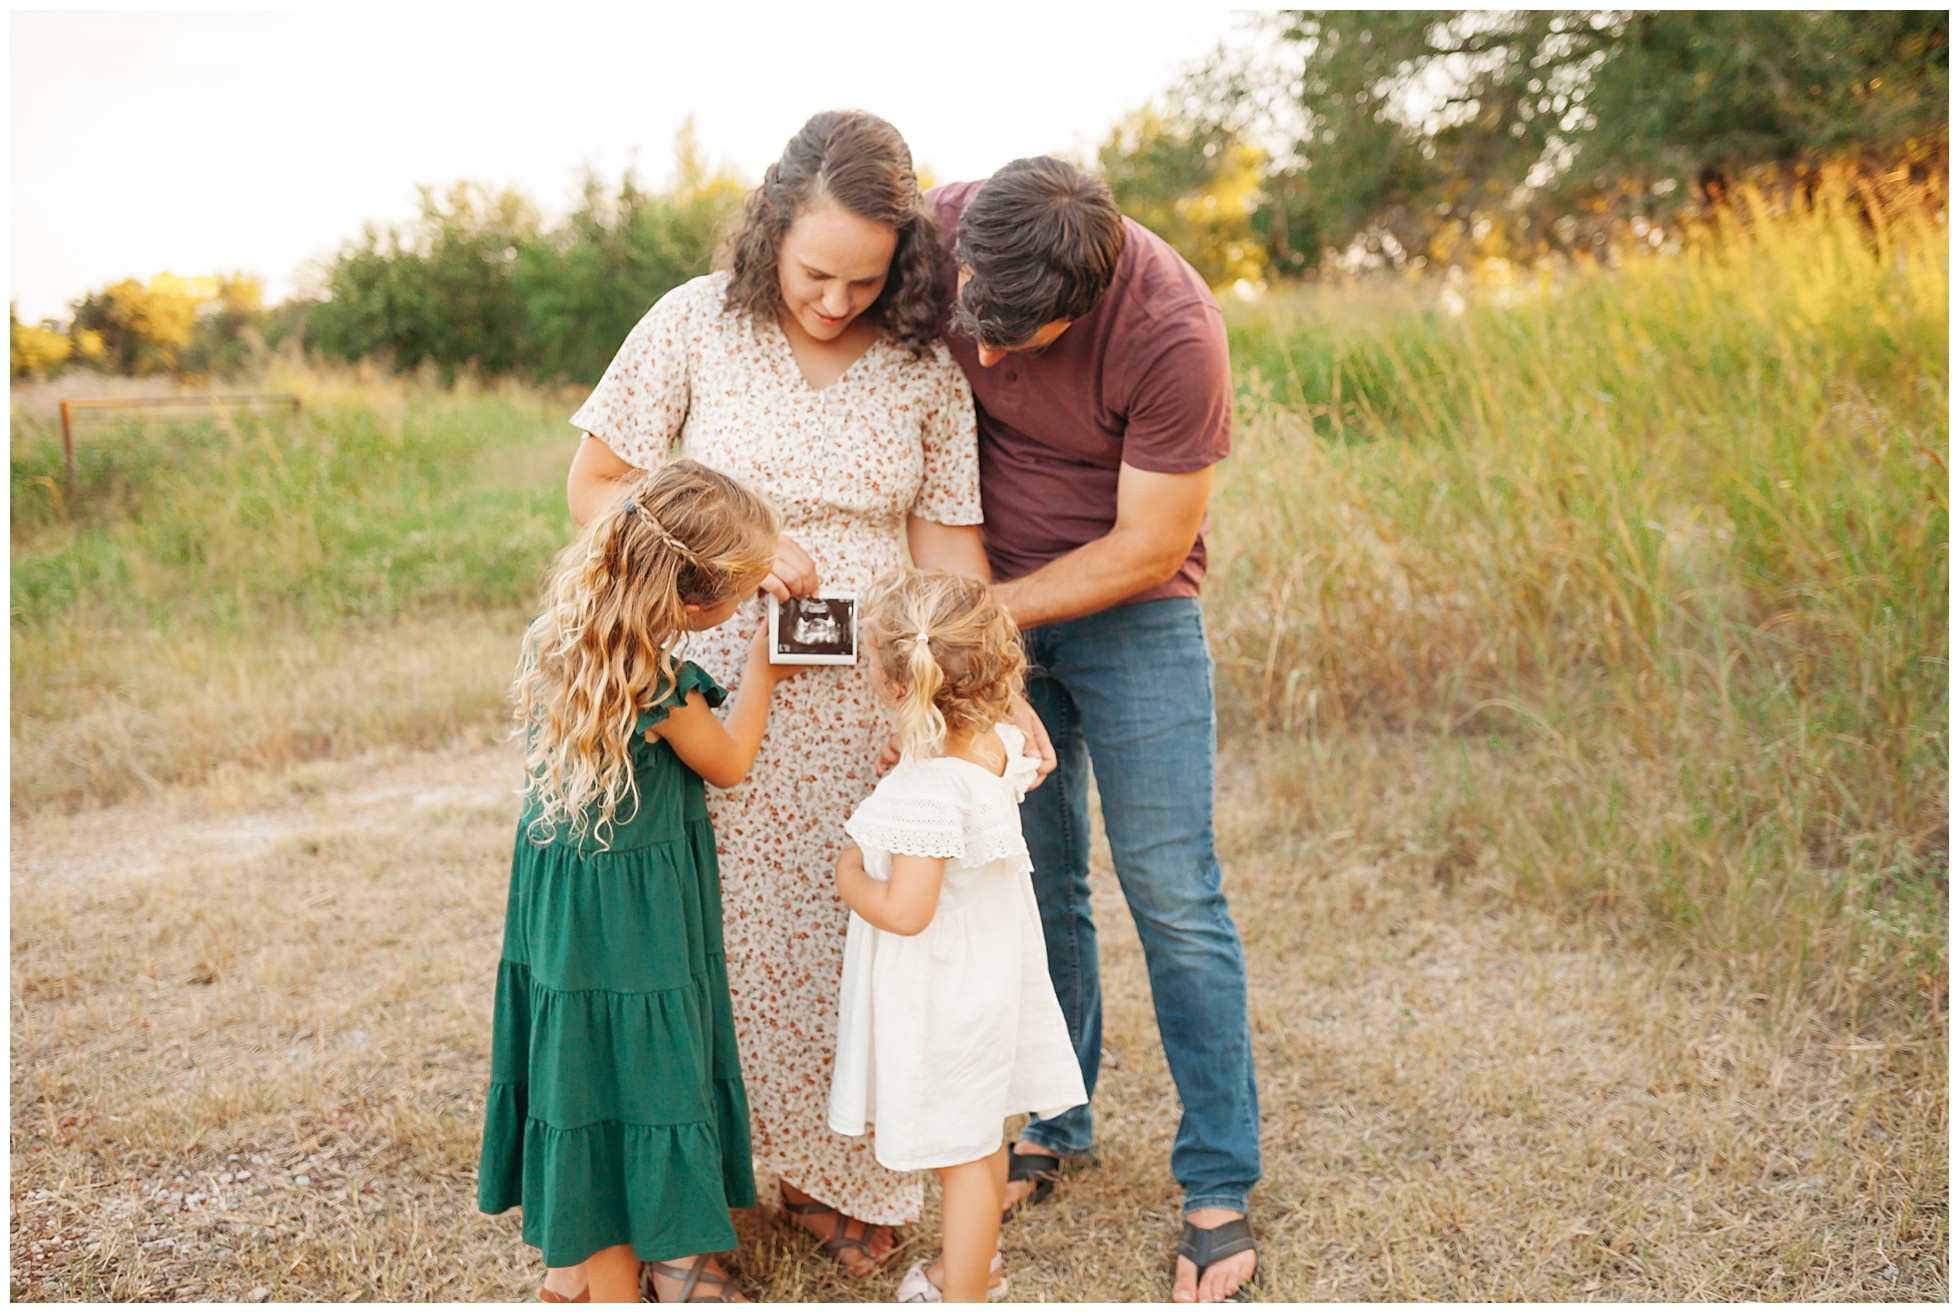 Family of four in field with ultrasound picture.